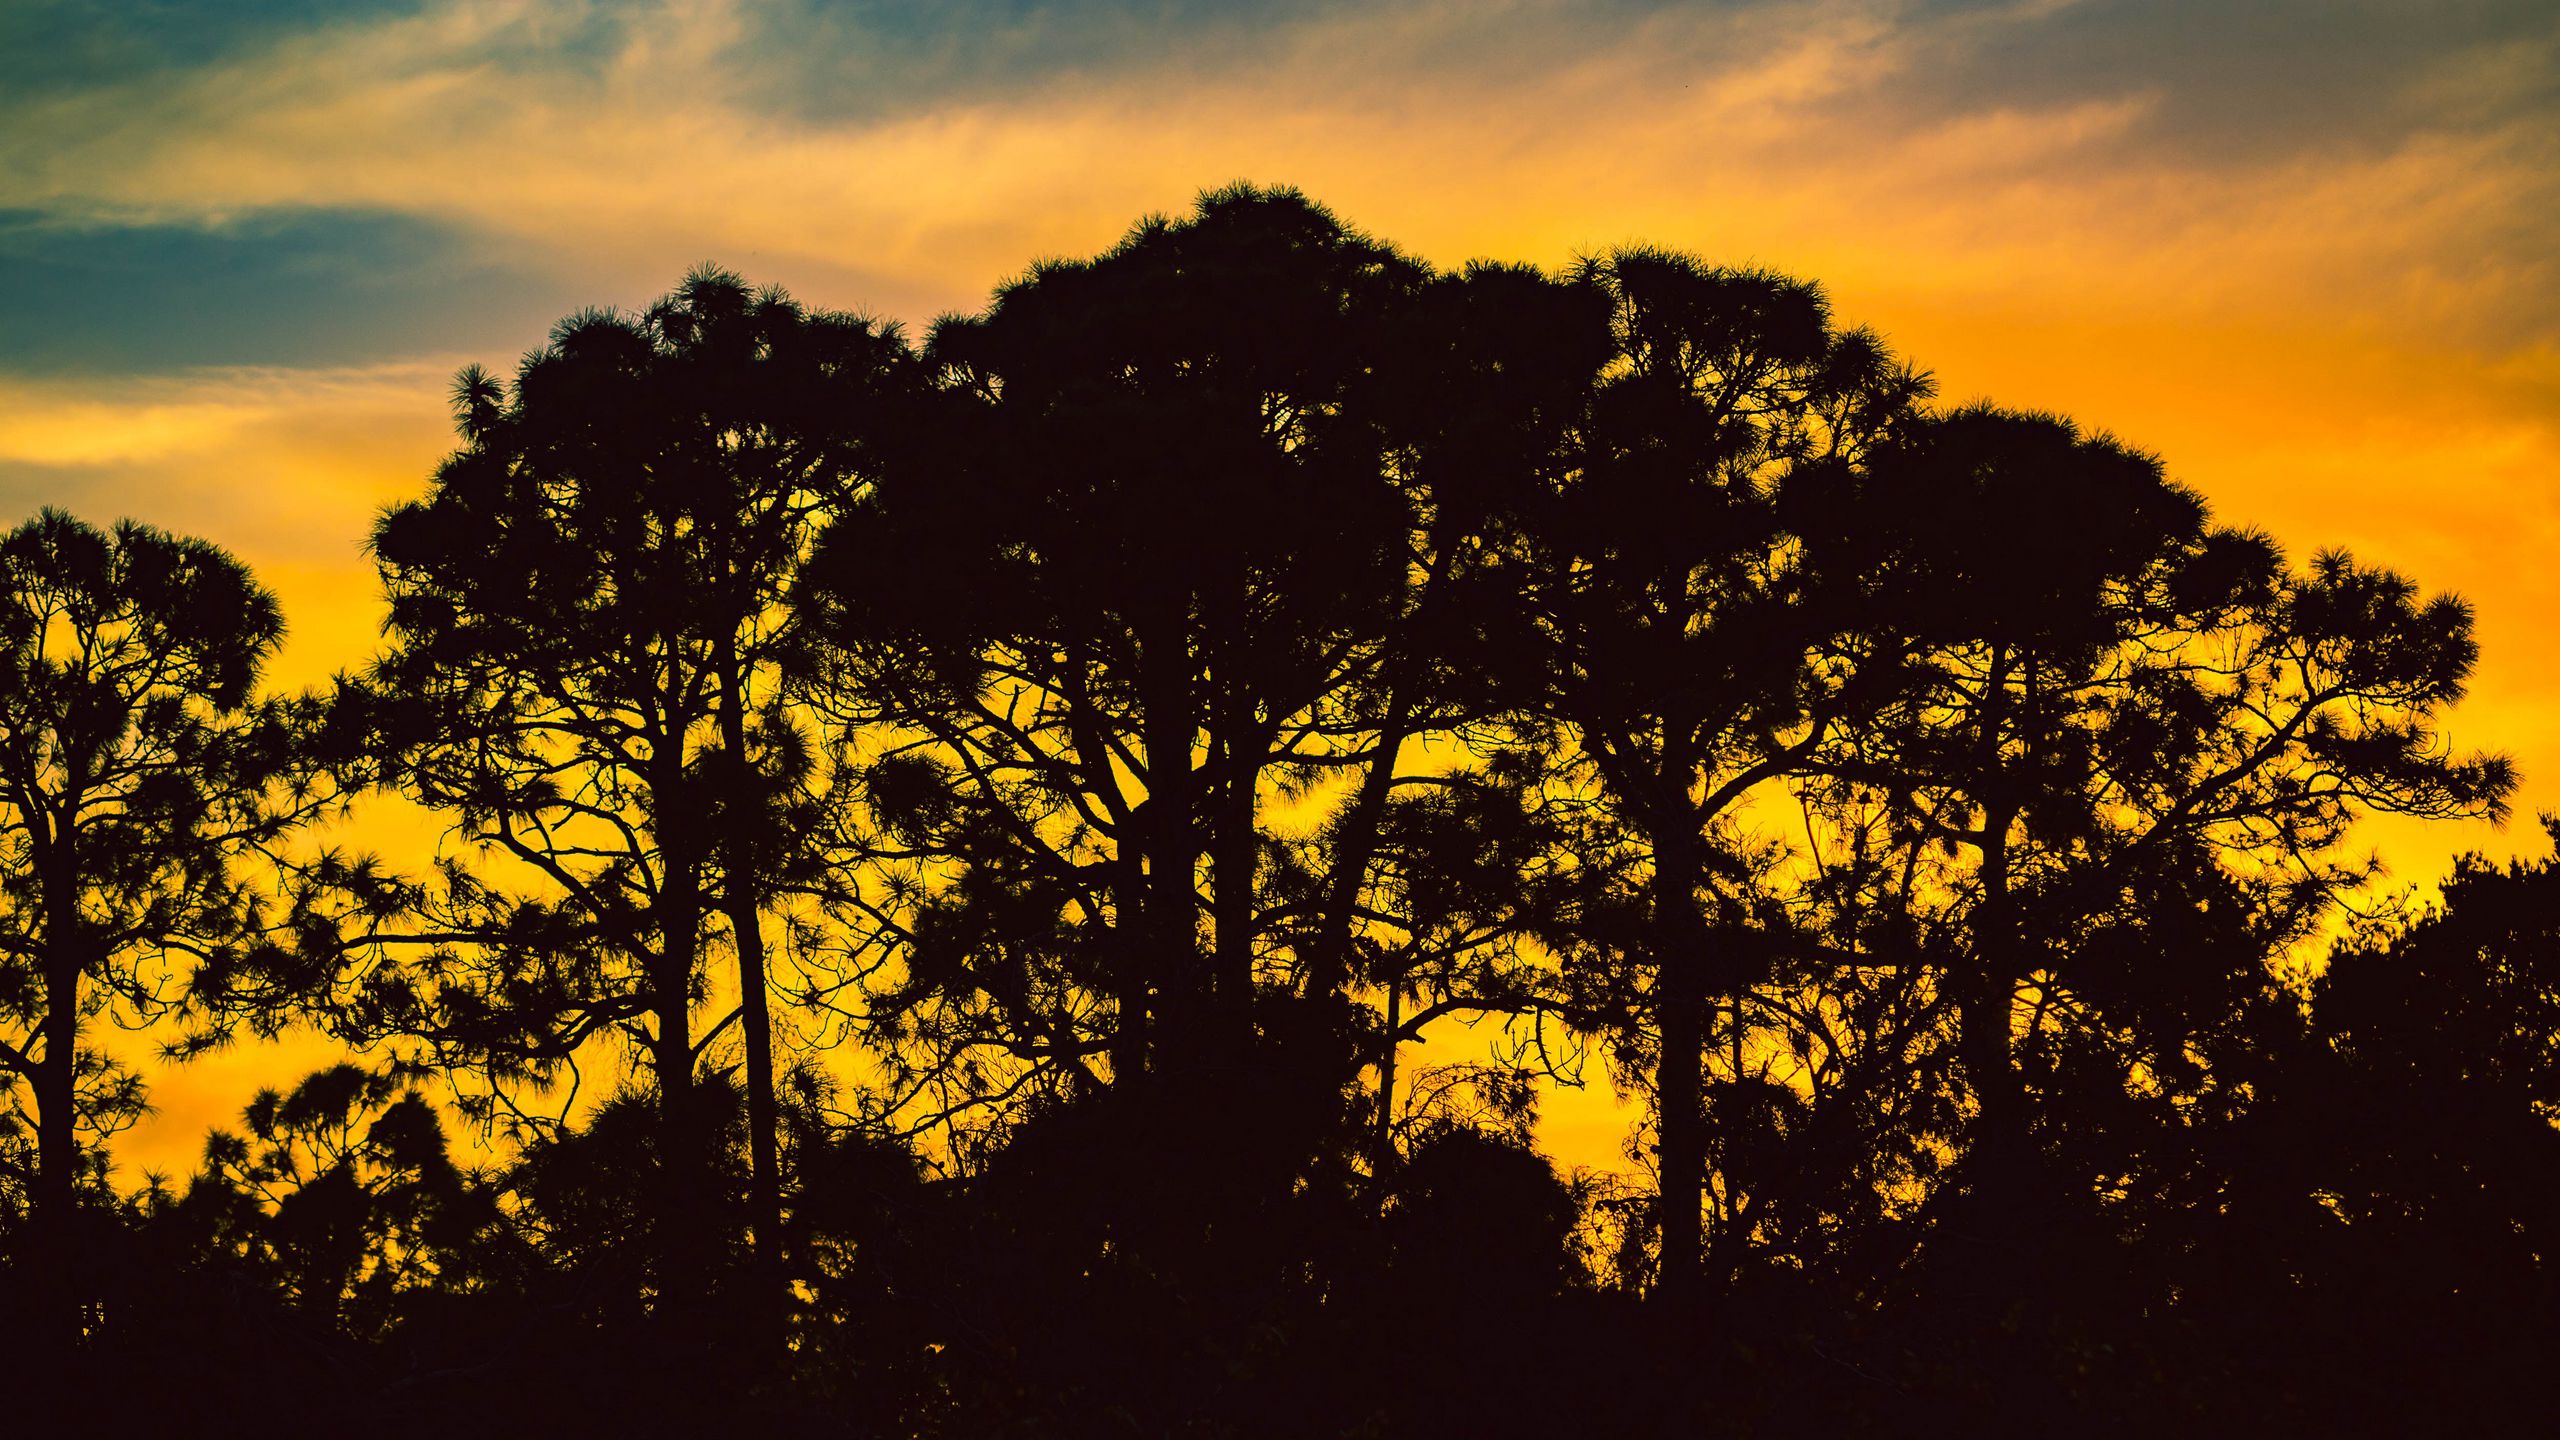 Download wallpaper 2560x1440 trees, night, silhouettes, sky widescreen ...